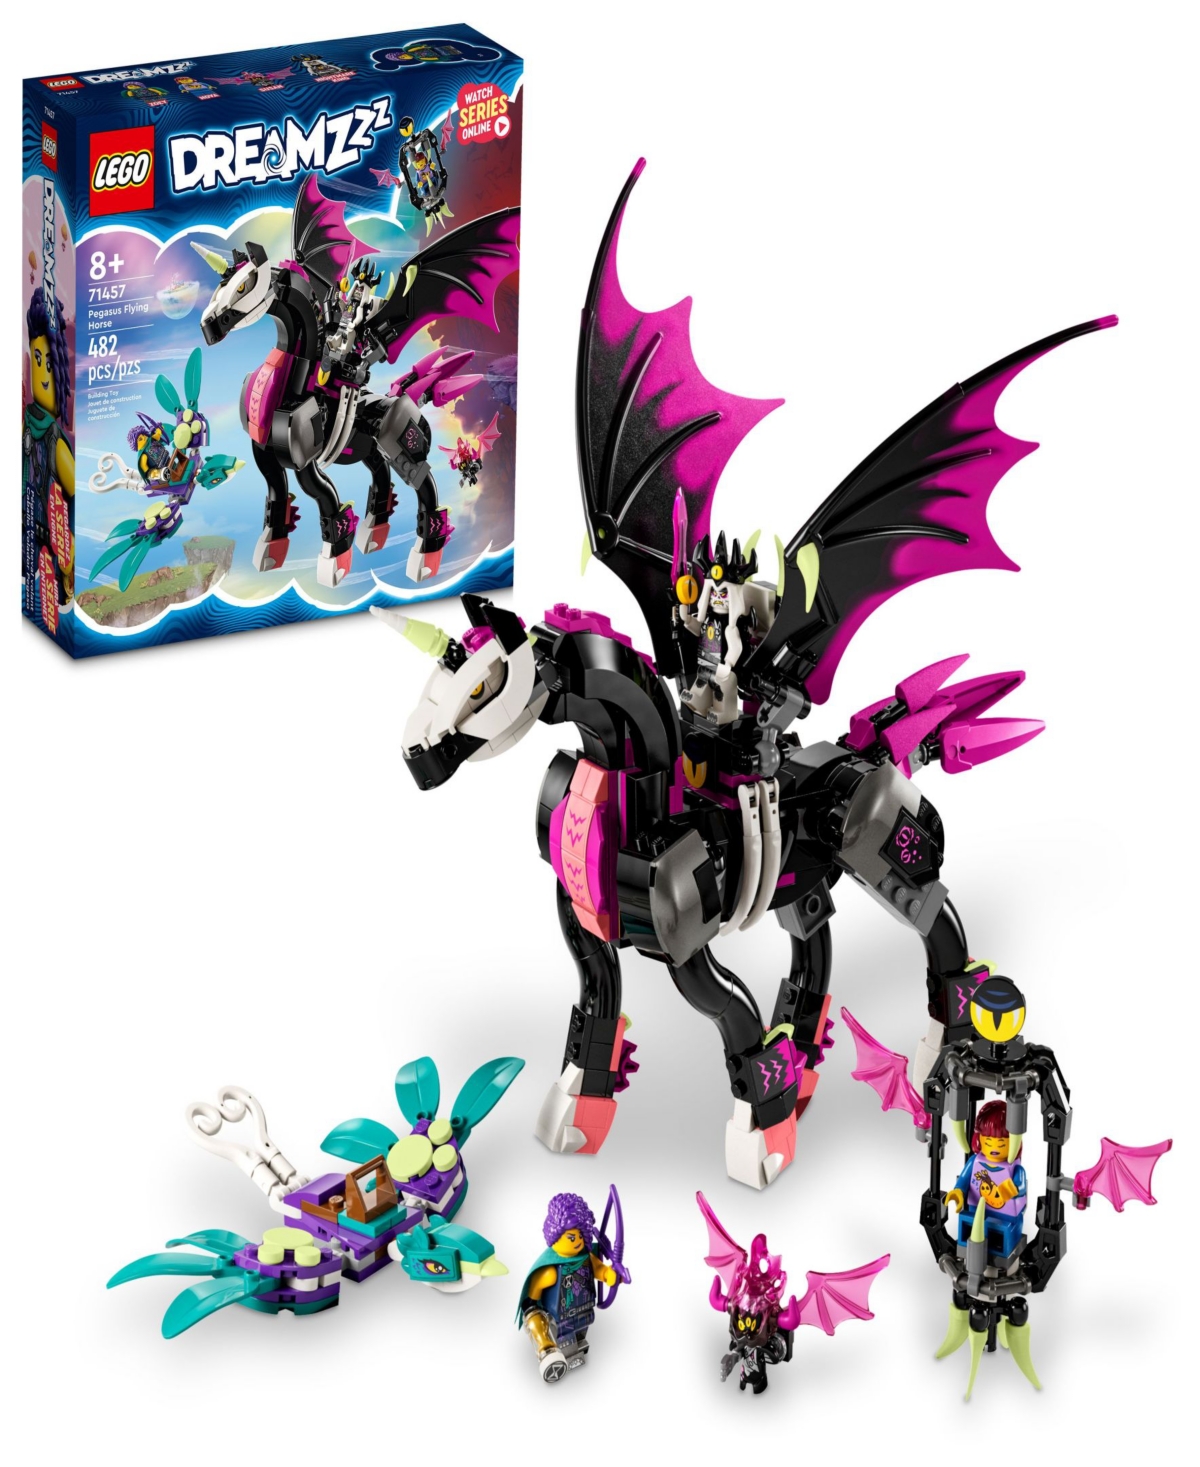 Lego Kids' Dreamzzz Pegasus Flying Horse Fantasy Action Figure Building Toy Set 71457 In Multicolor